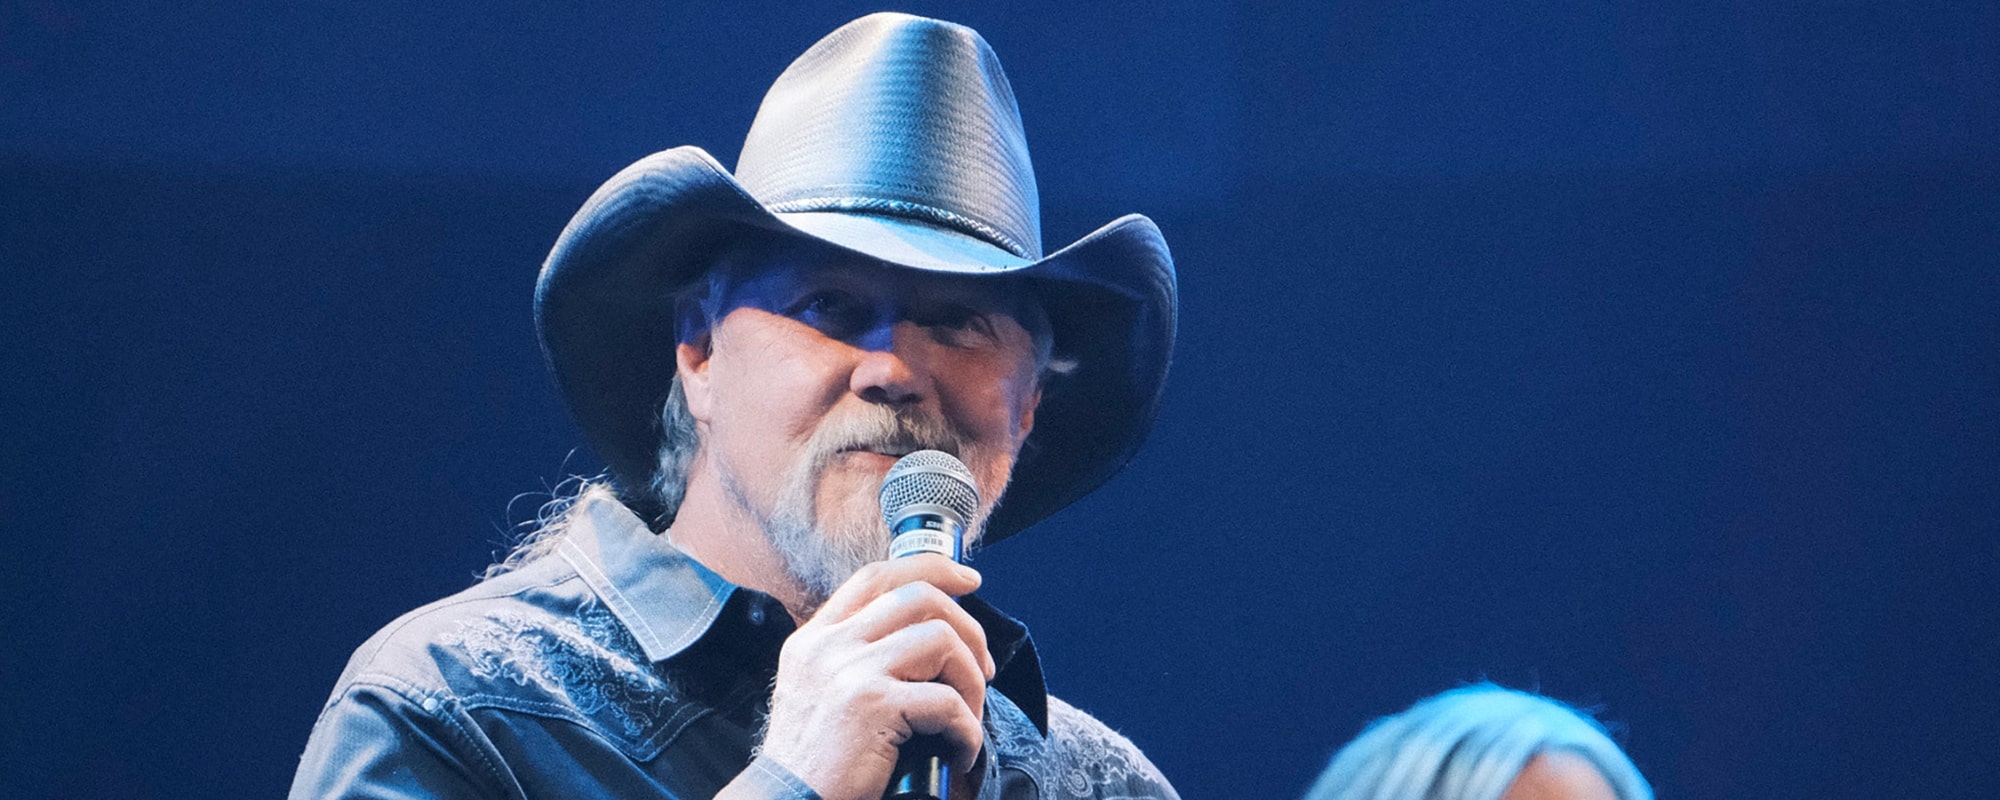 New Episodes of ‘Behind the Music’ Will Feature Trace Adkins, Wolfgang Van Halen, and Bell Biv DeVoe